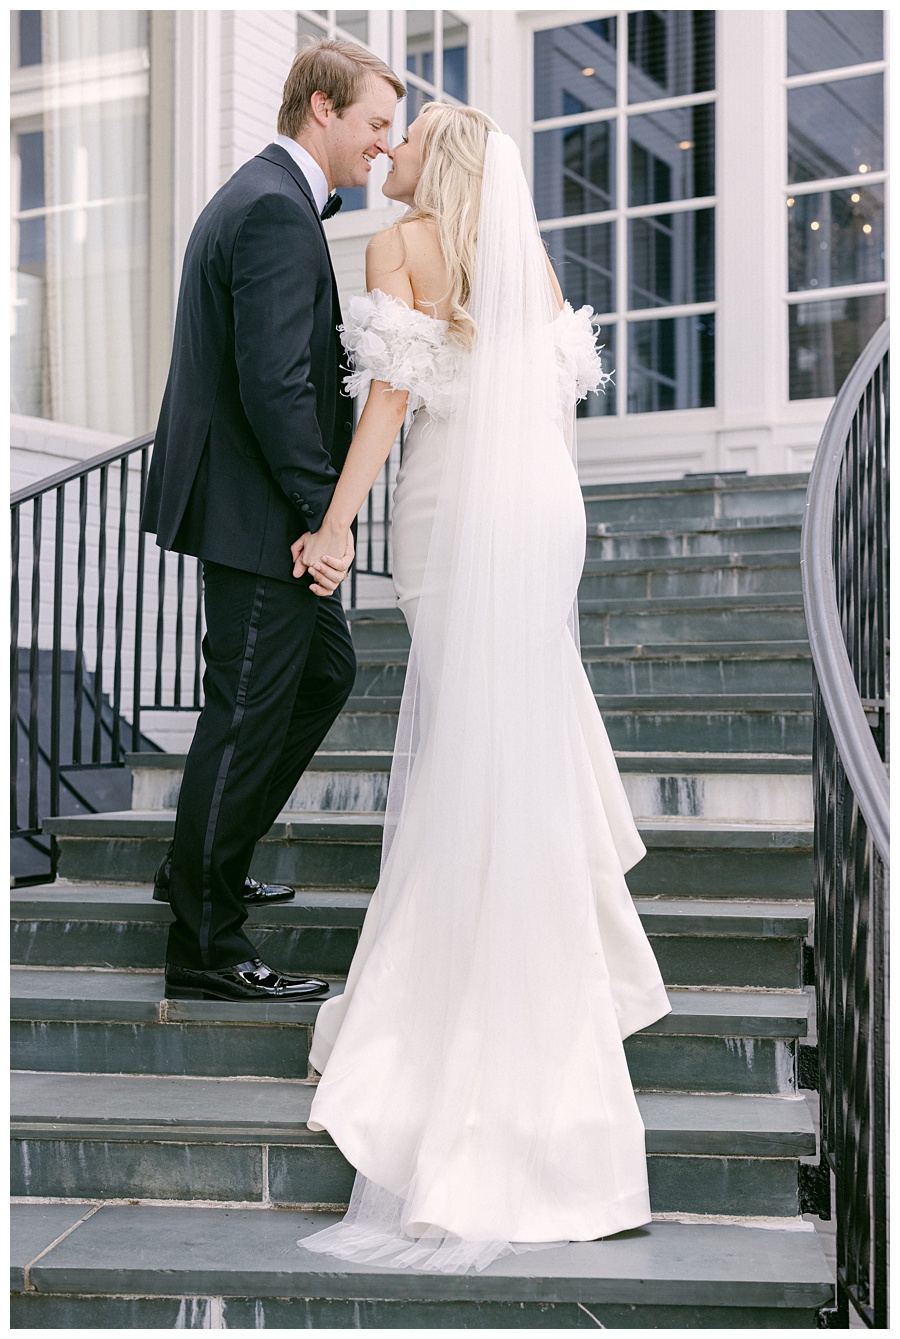 wedding dress, bride and groom, first look, wedding day, wedding photographer, wedding photos, groom tuxedo, charlotte wedding photographer, wedding portrait, Myers Park Country Club Wedding